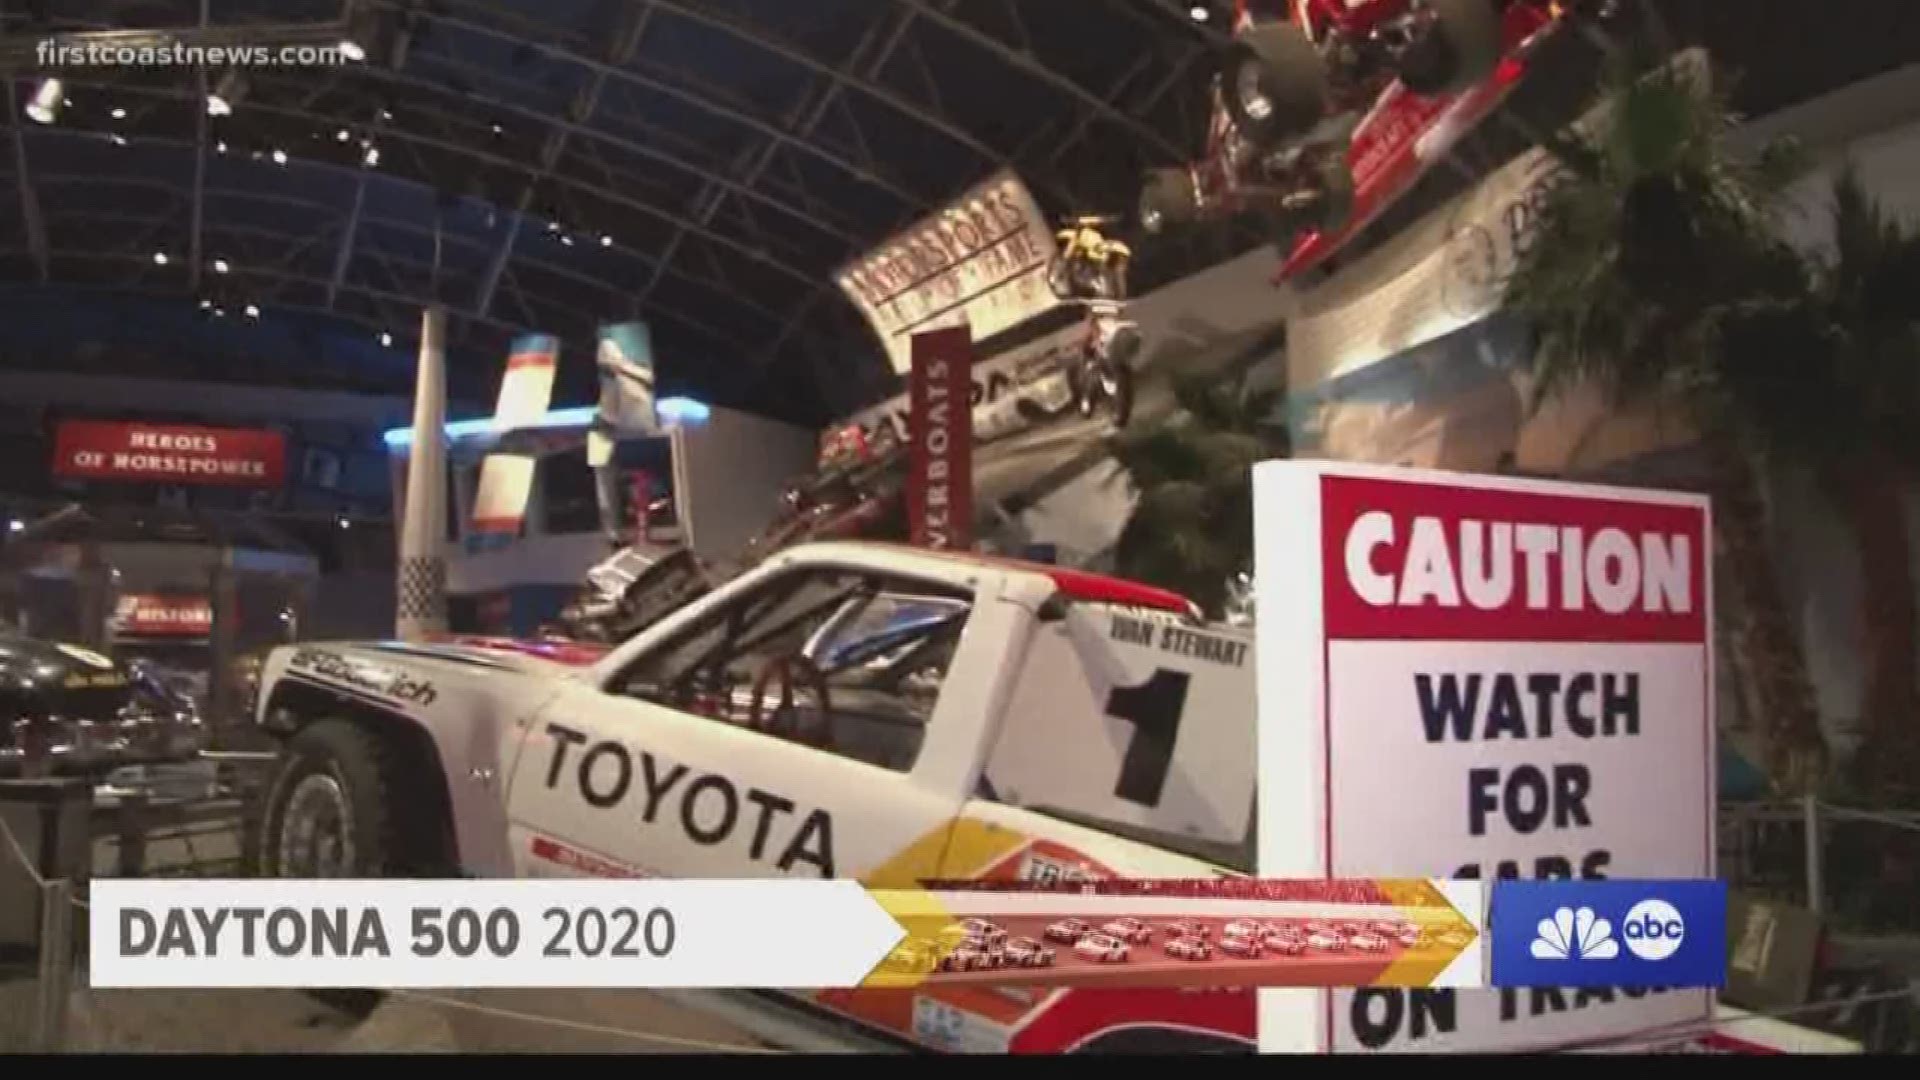 Motorsport enthusiasts can now explore its history at the Motorsports Hall of Fame of America.